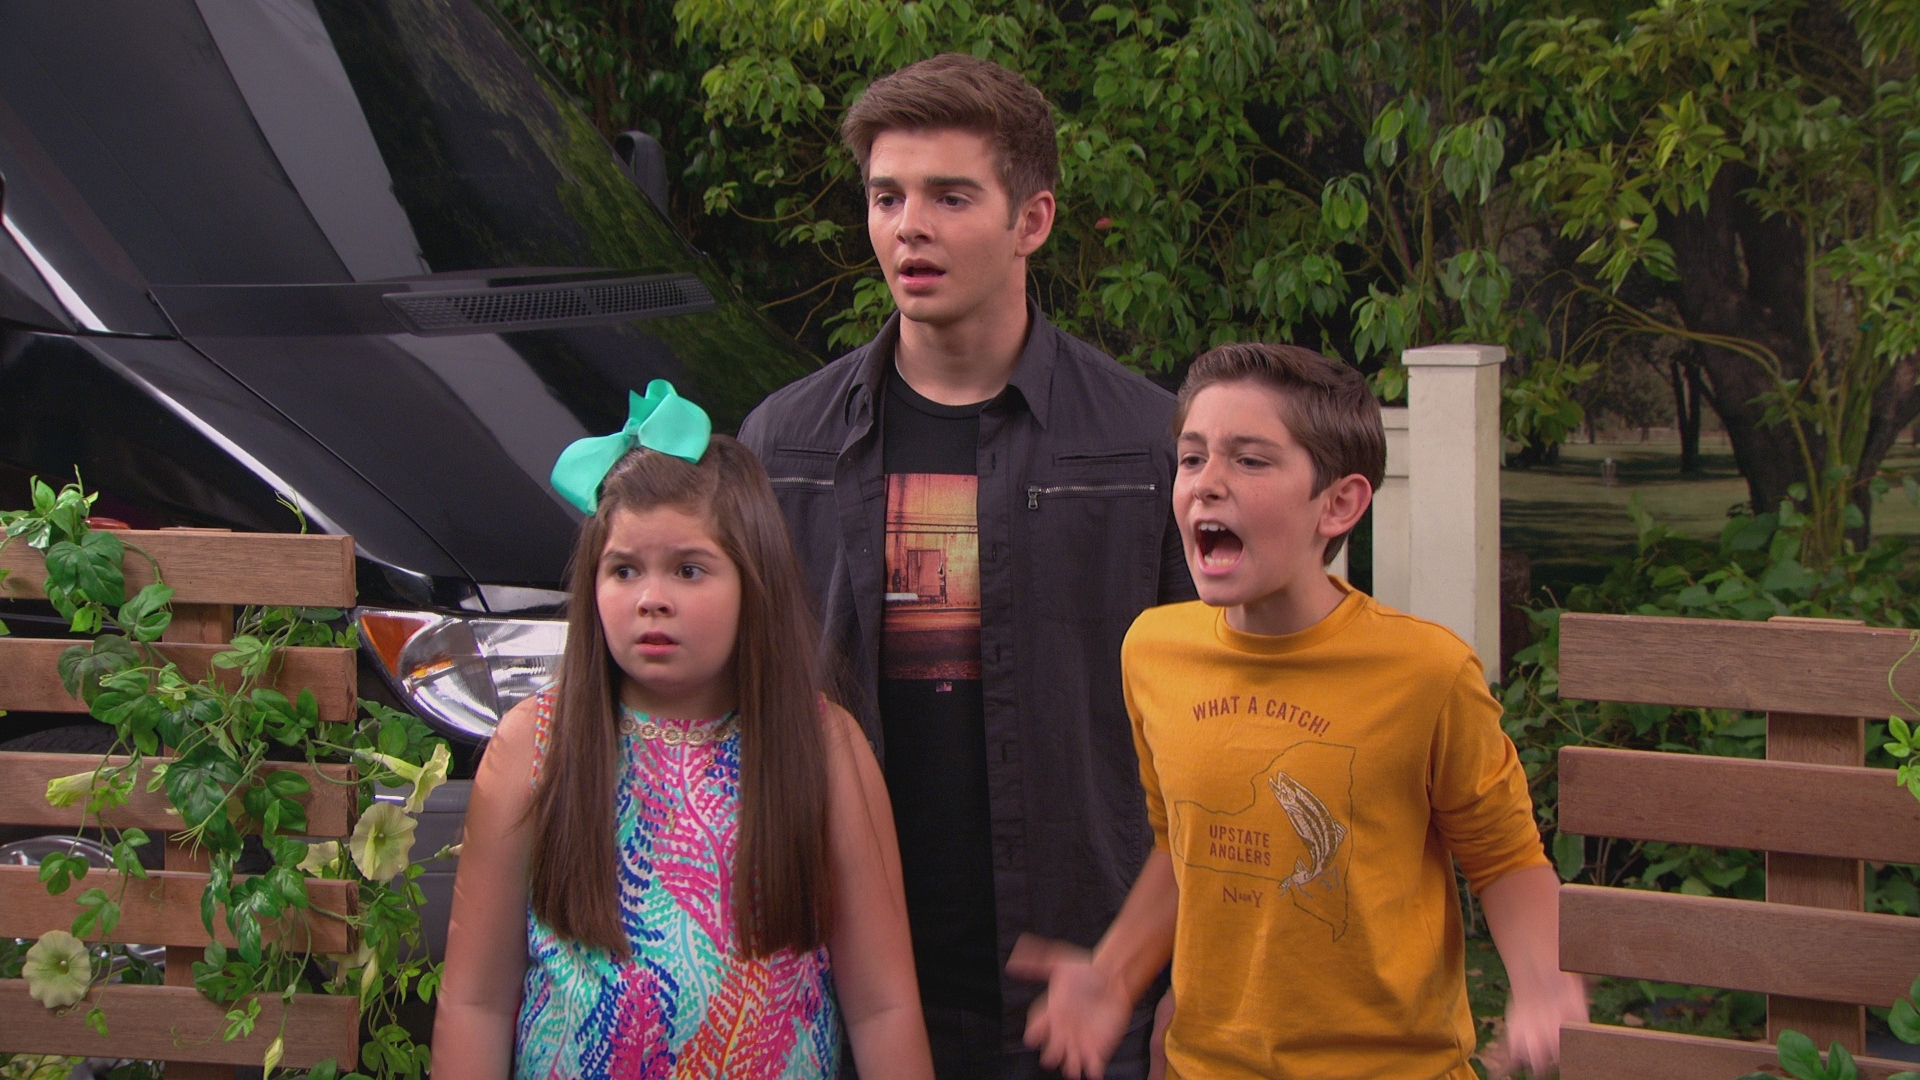 The Thundermans - The Thundermans updated their cover photo.